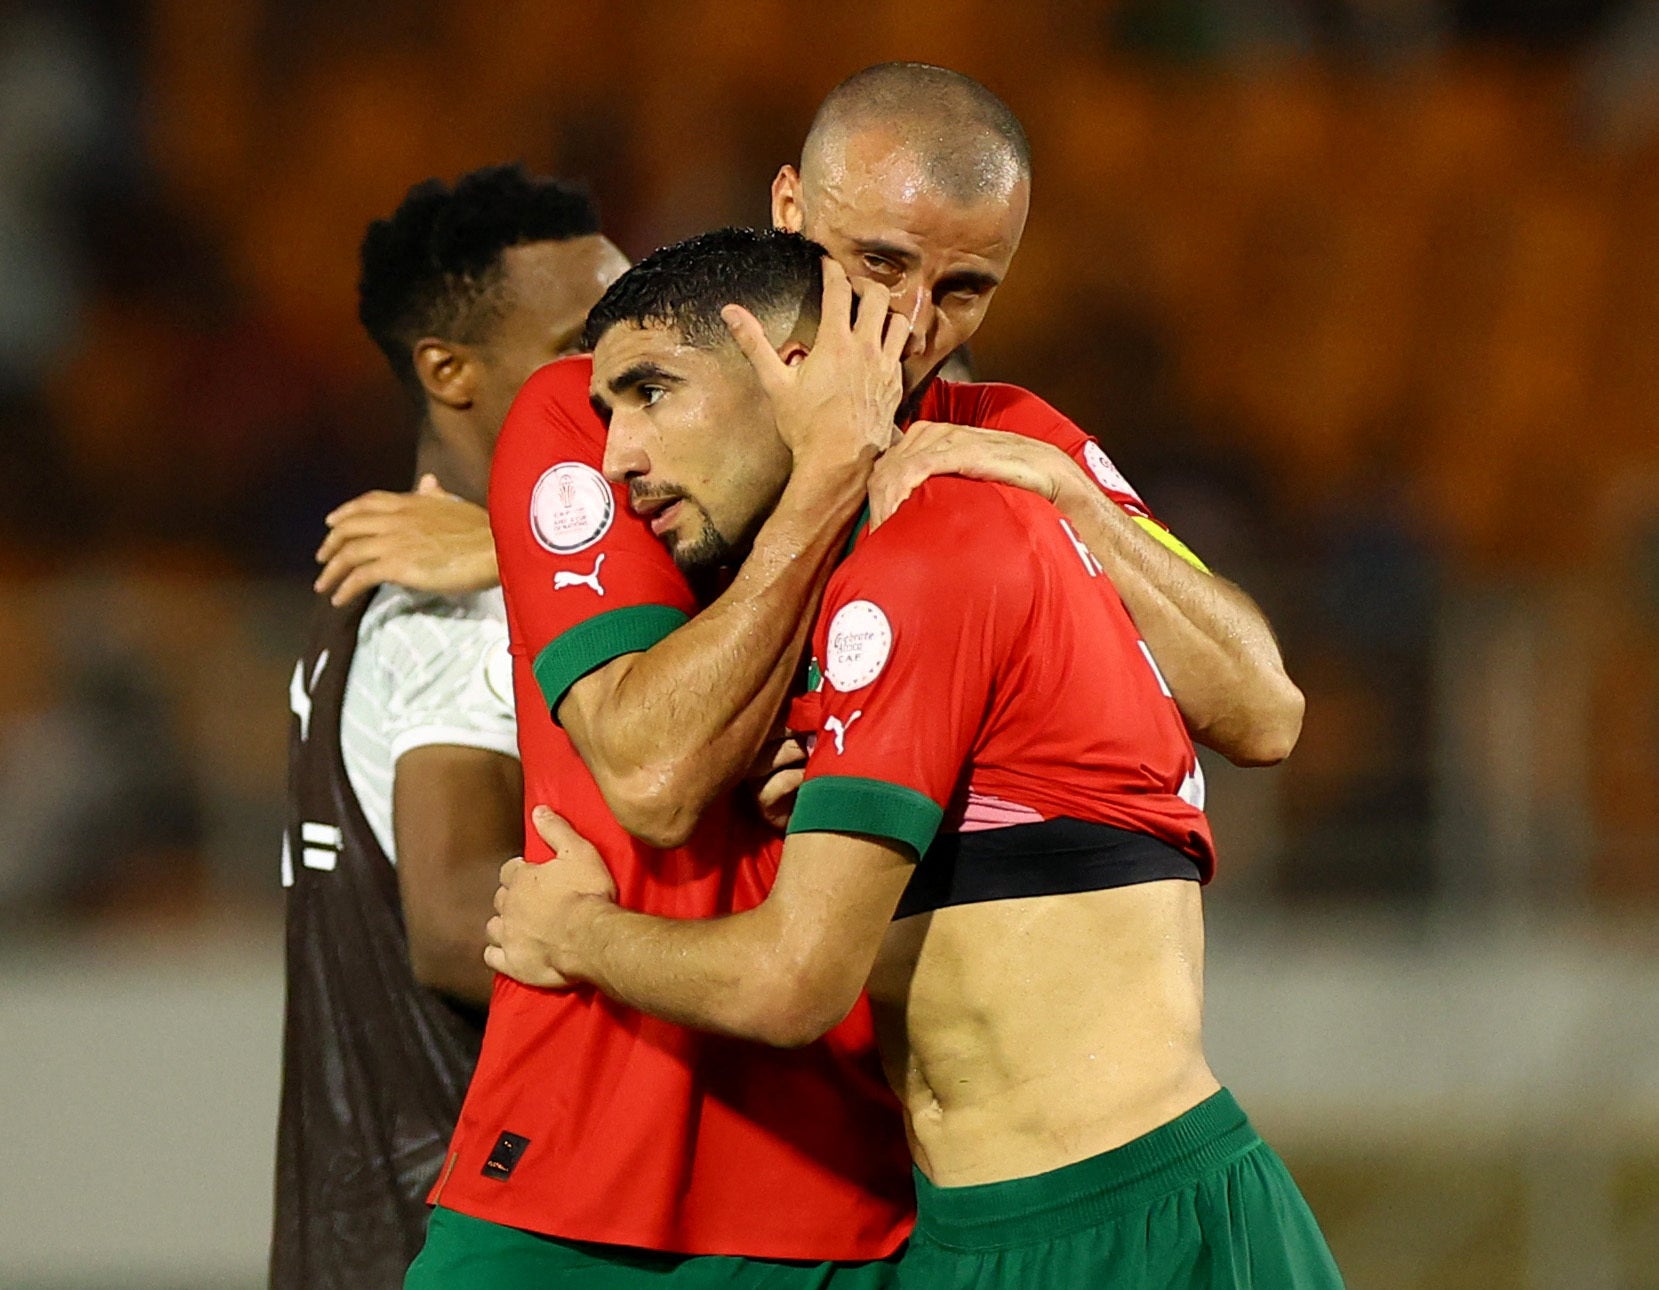 Morocco were knocked out of the continental tournament despite being favourites to progress